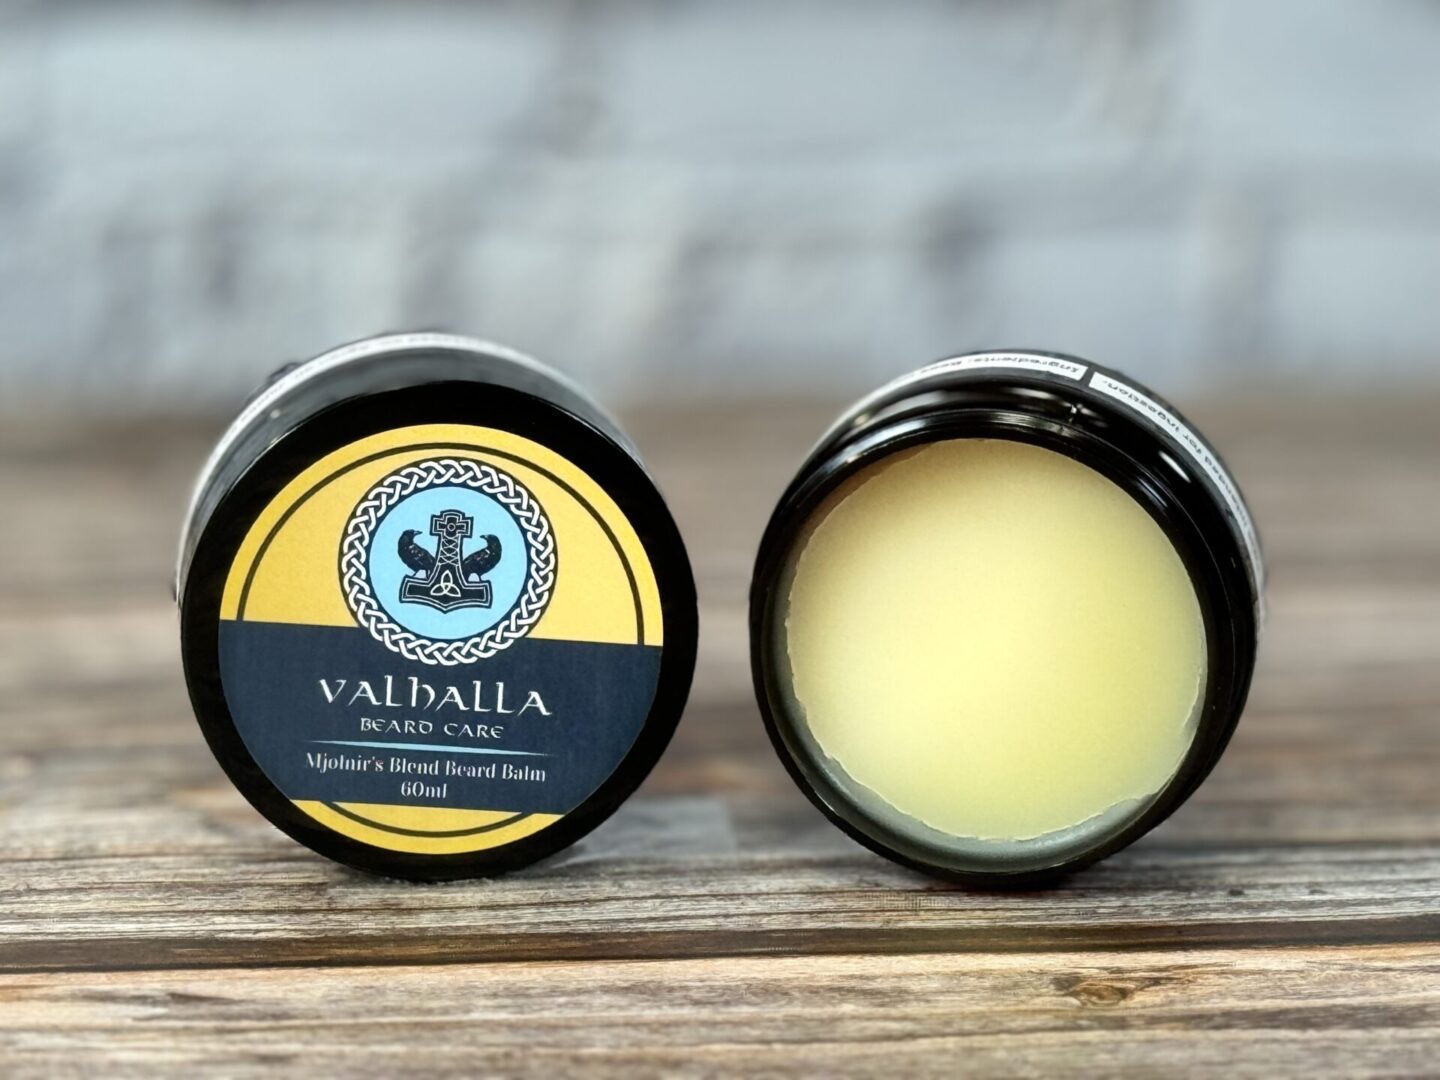 A couple of small containers with some kind of balm